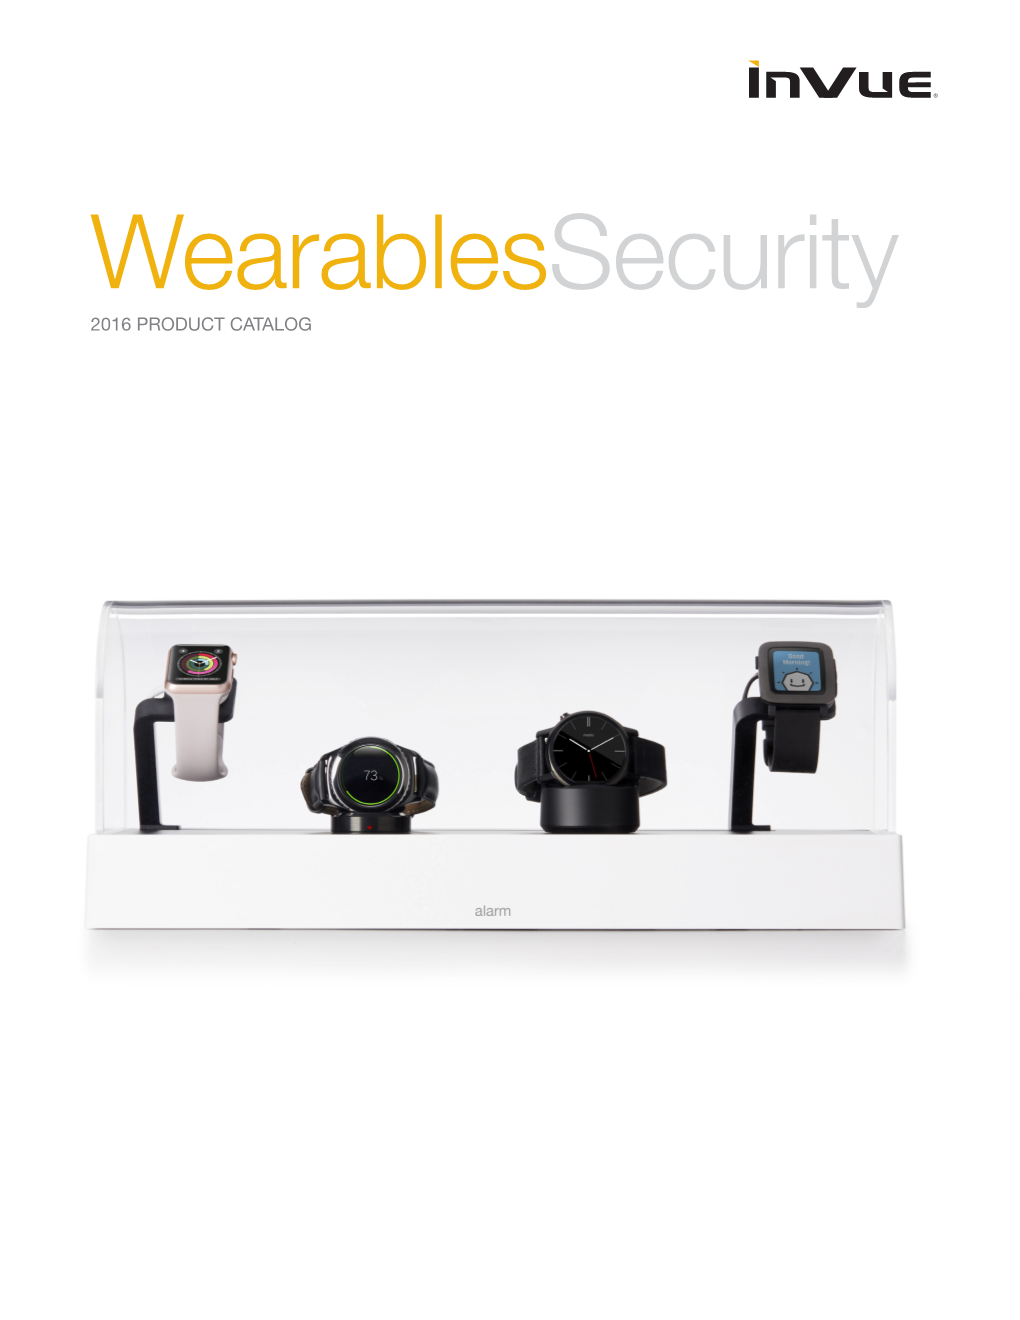 Wearablessecurity 2016 PRODUCT CATALOG